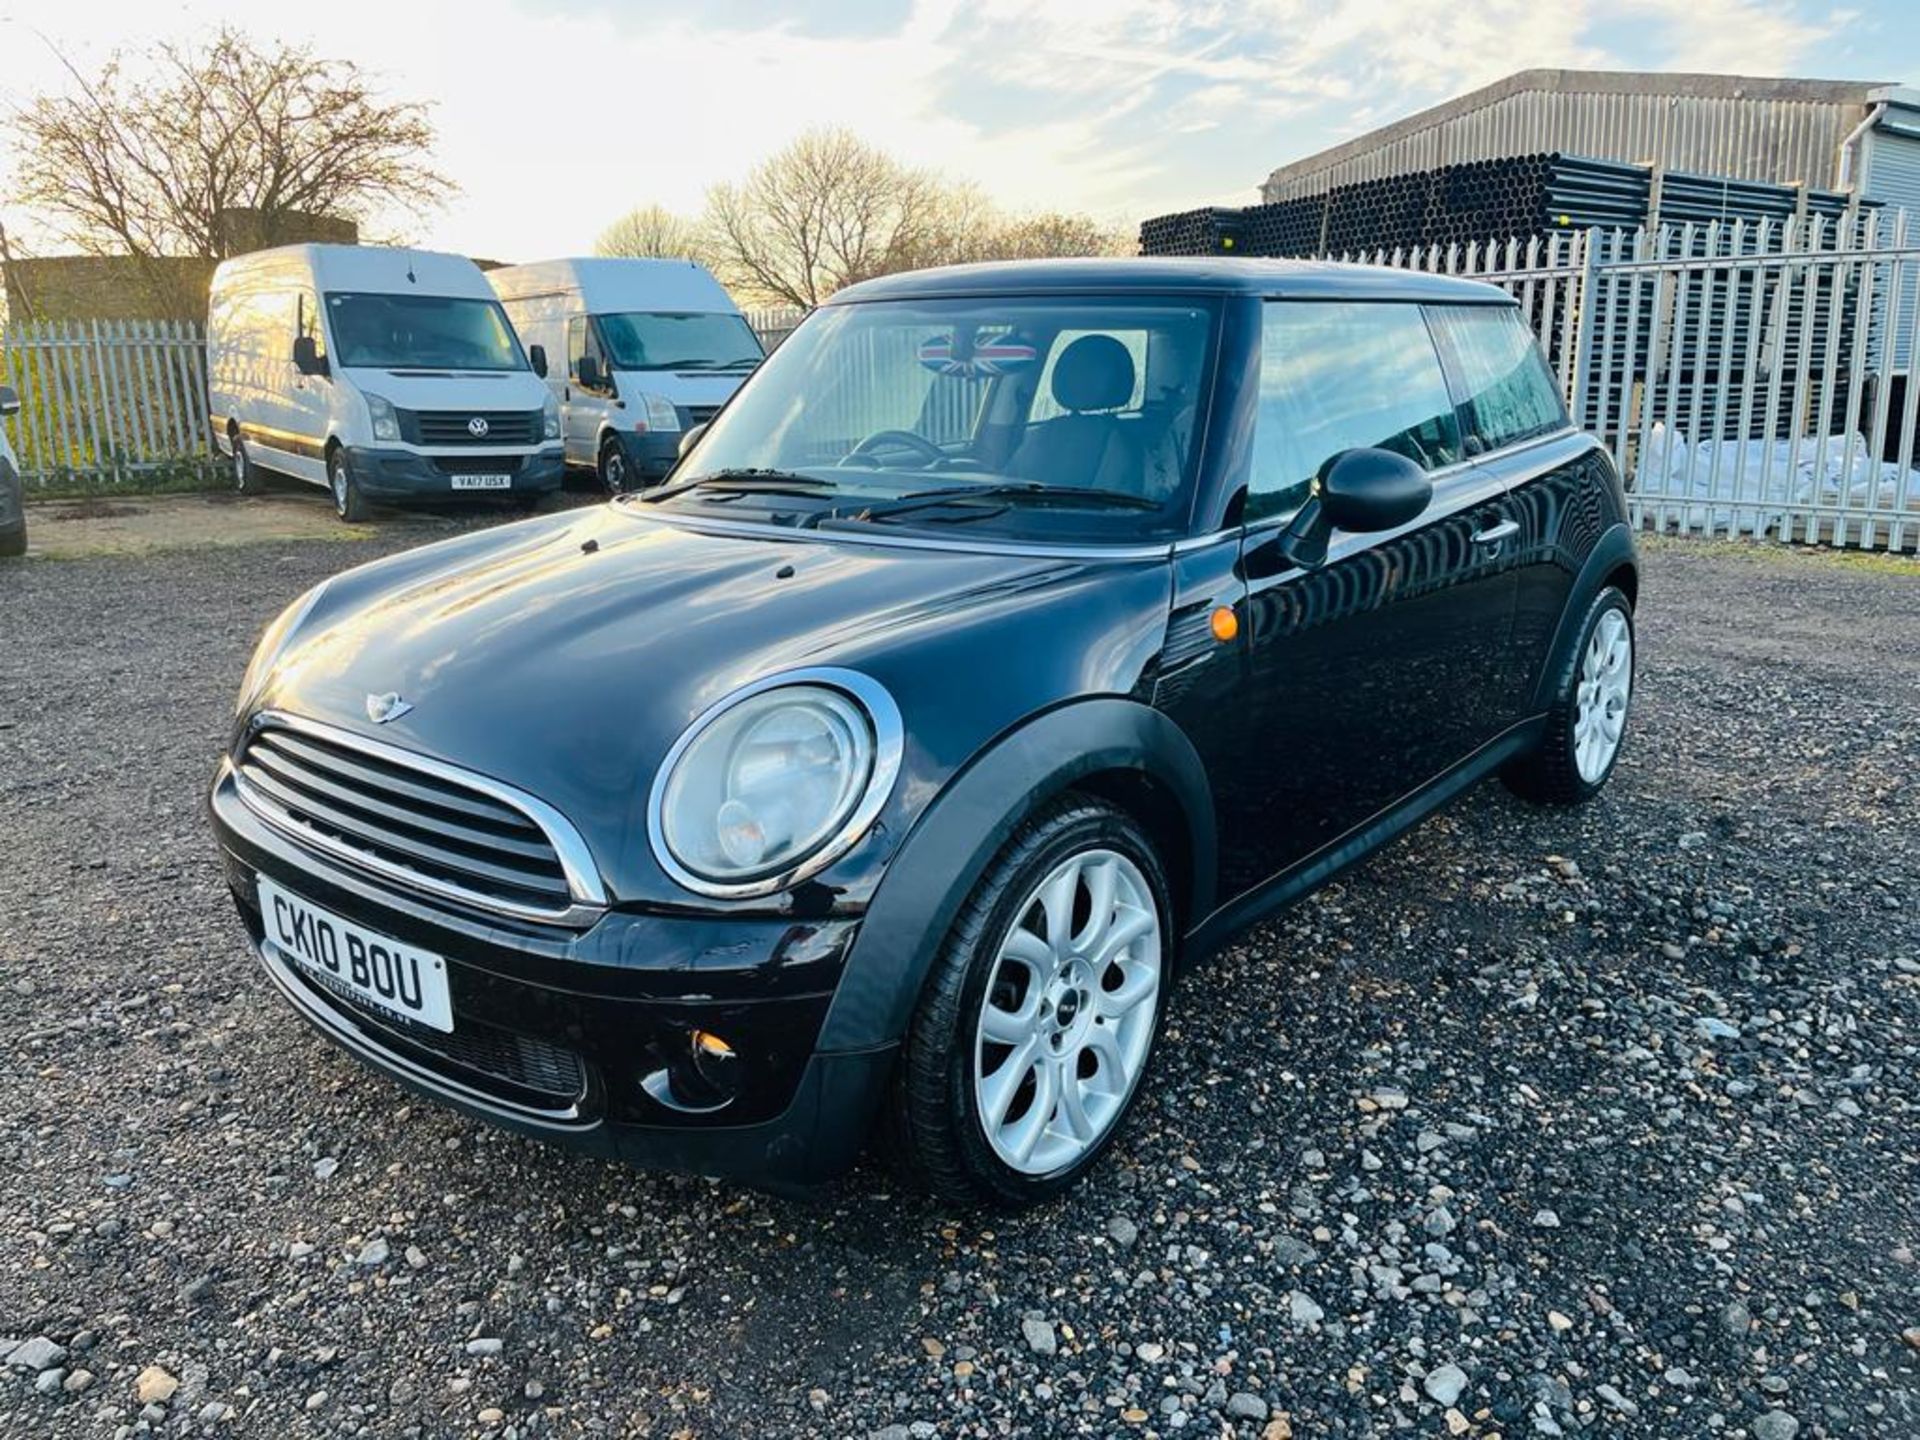 Mini One 1.6 Start/Stop 100 2010 '10 Reg' ' Very Economical' Only 108,430 - Image 3 of 26